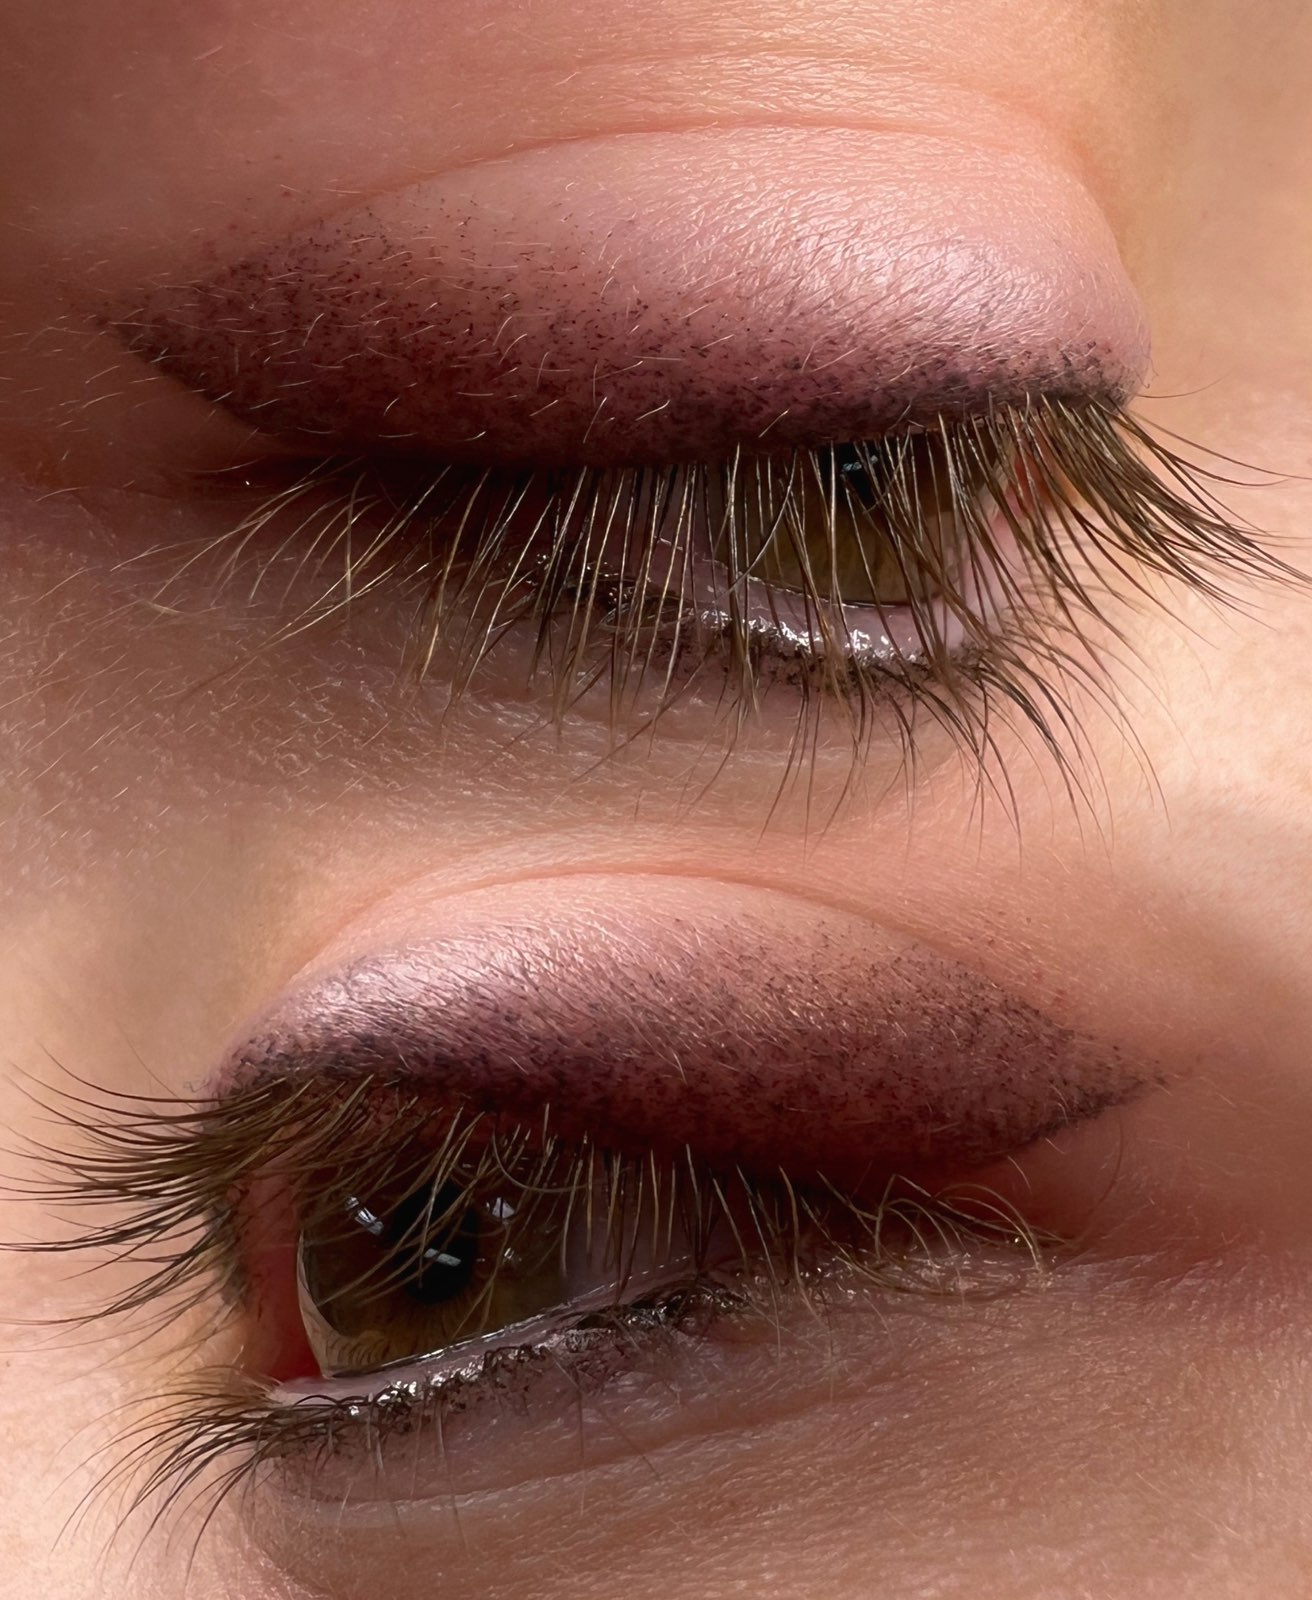 Detailed image of a winged eyeliner tattoo with shading, highlighting the bold and stylish look achieved through this technique.